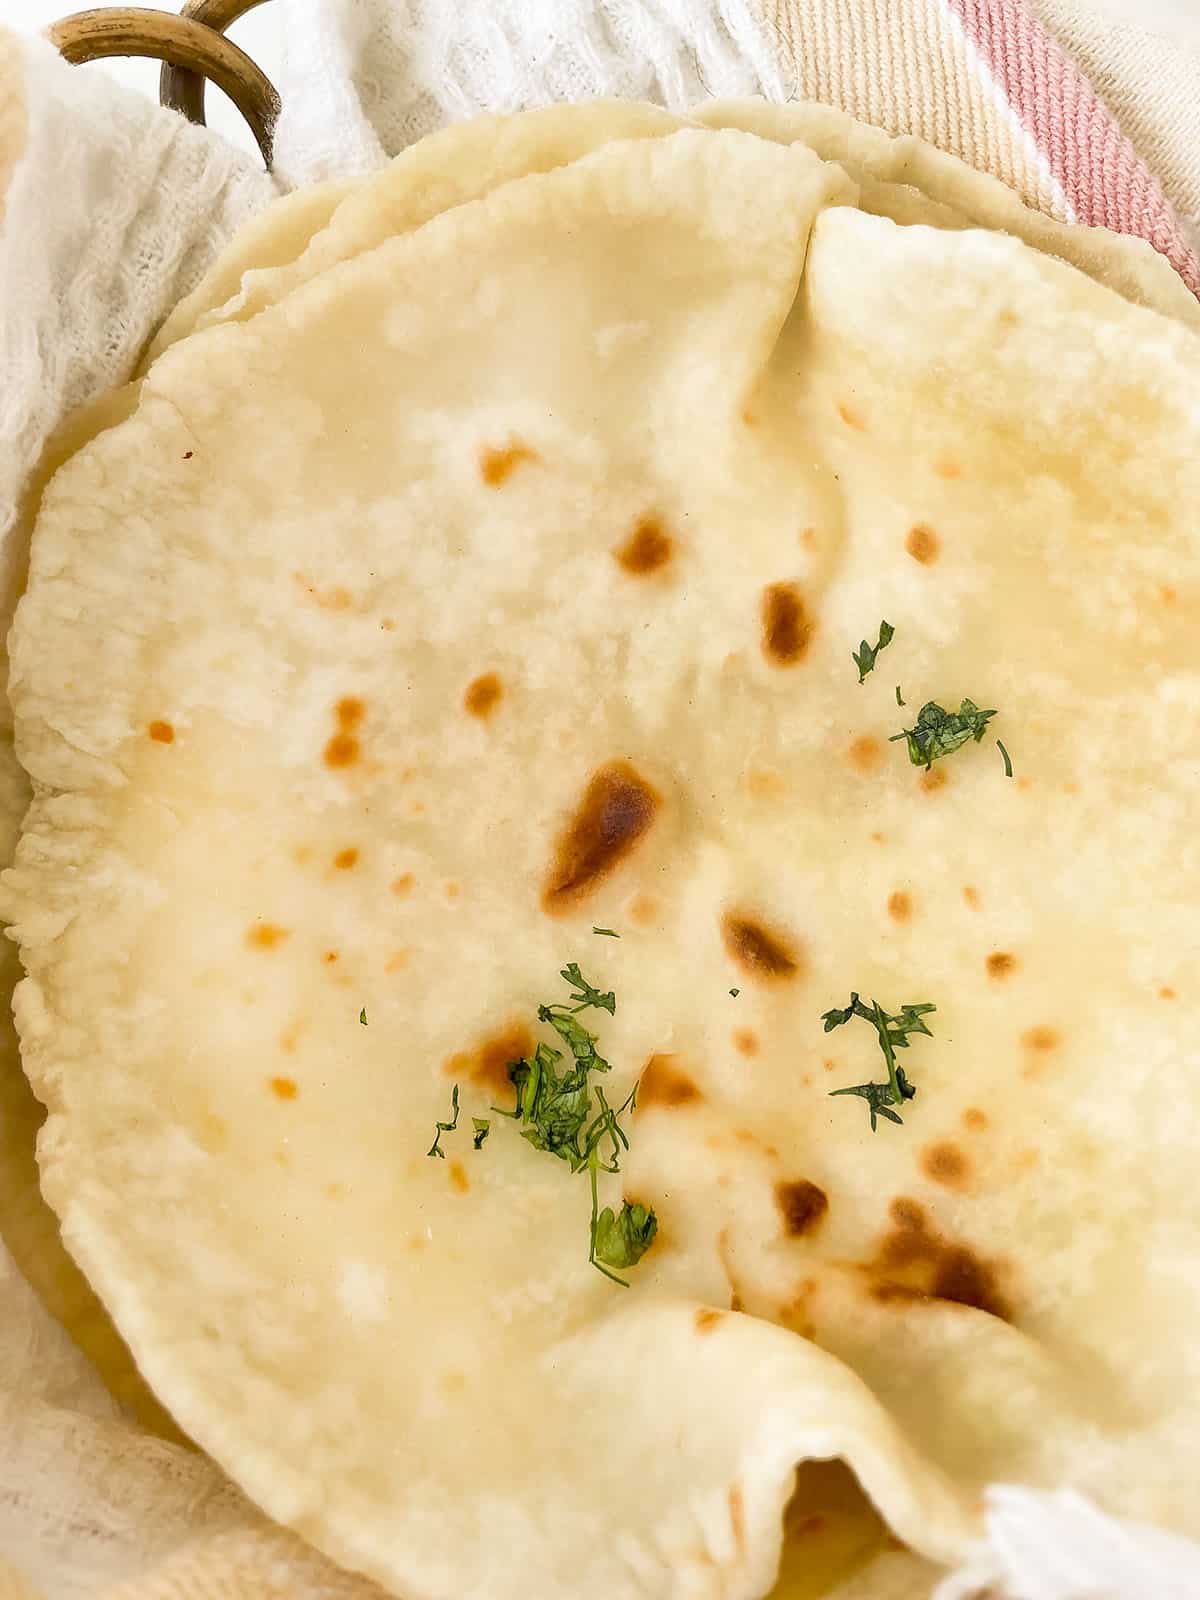 The naan breads sitting in a basket lined with a kitchen towel to keep soft.